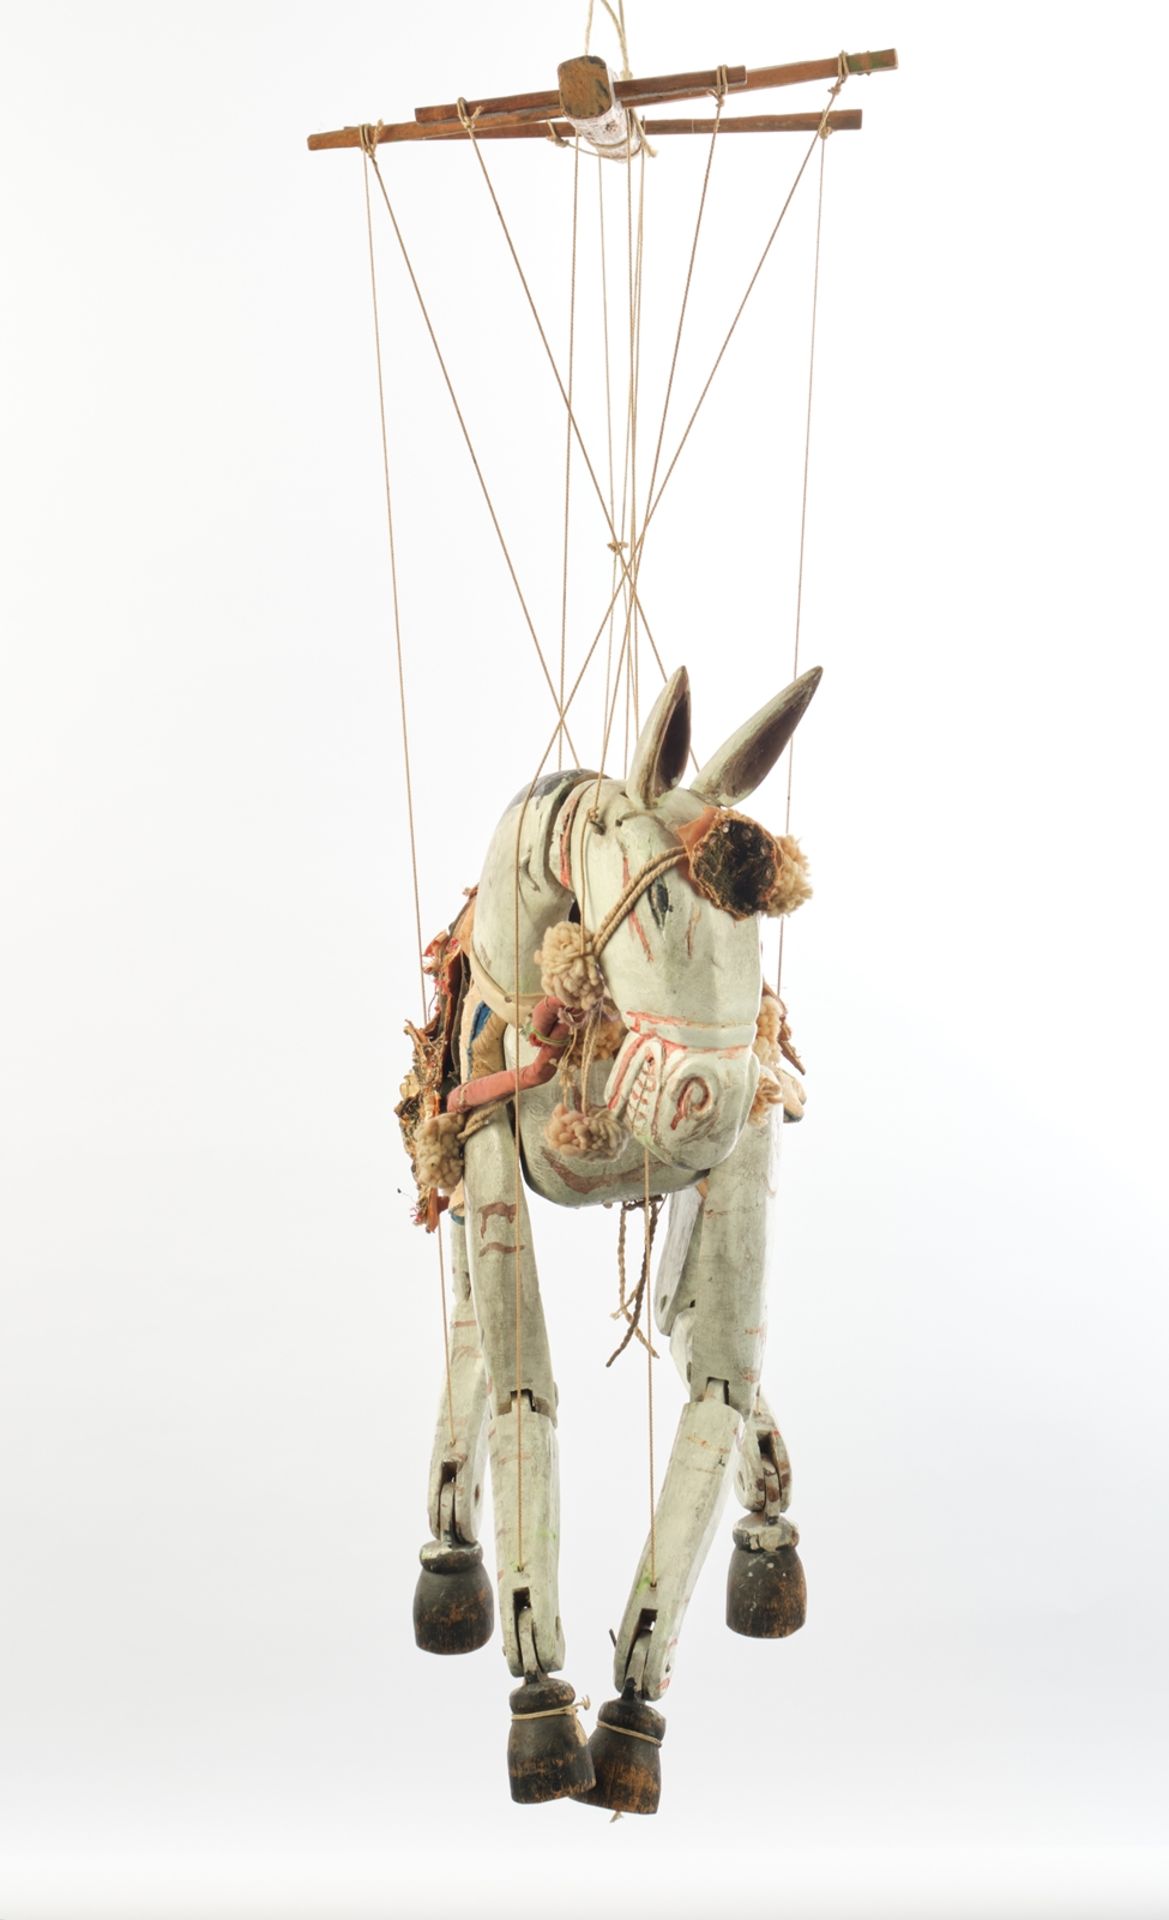 Marionette,,"Horse", Burma, 2nd half 20th century, wood, painted, fabric saddle, embroidered with b - Image 2 of 4